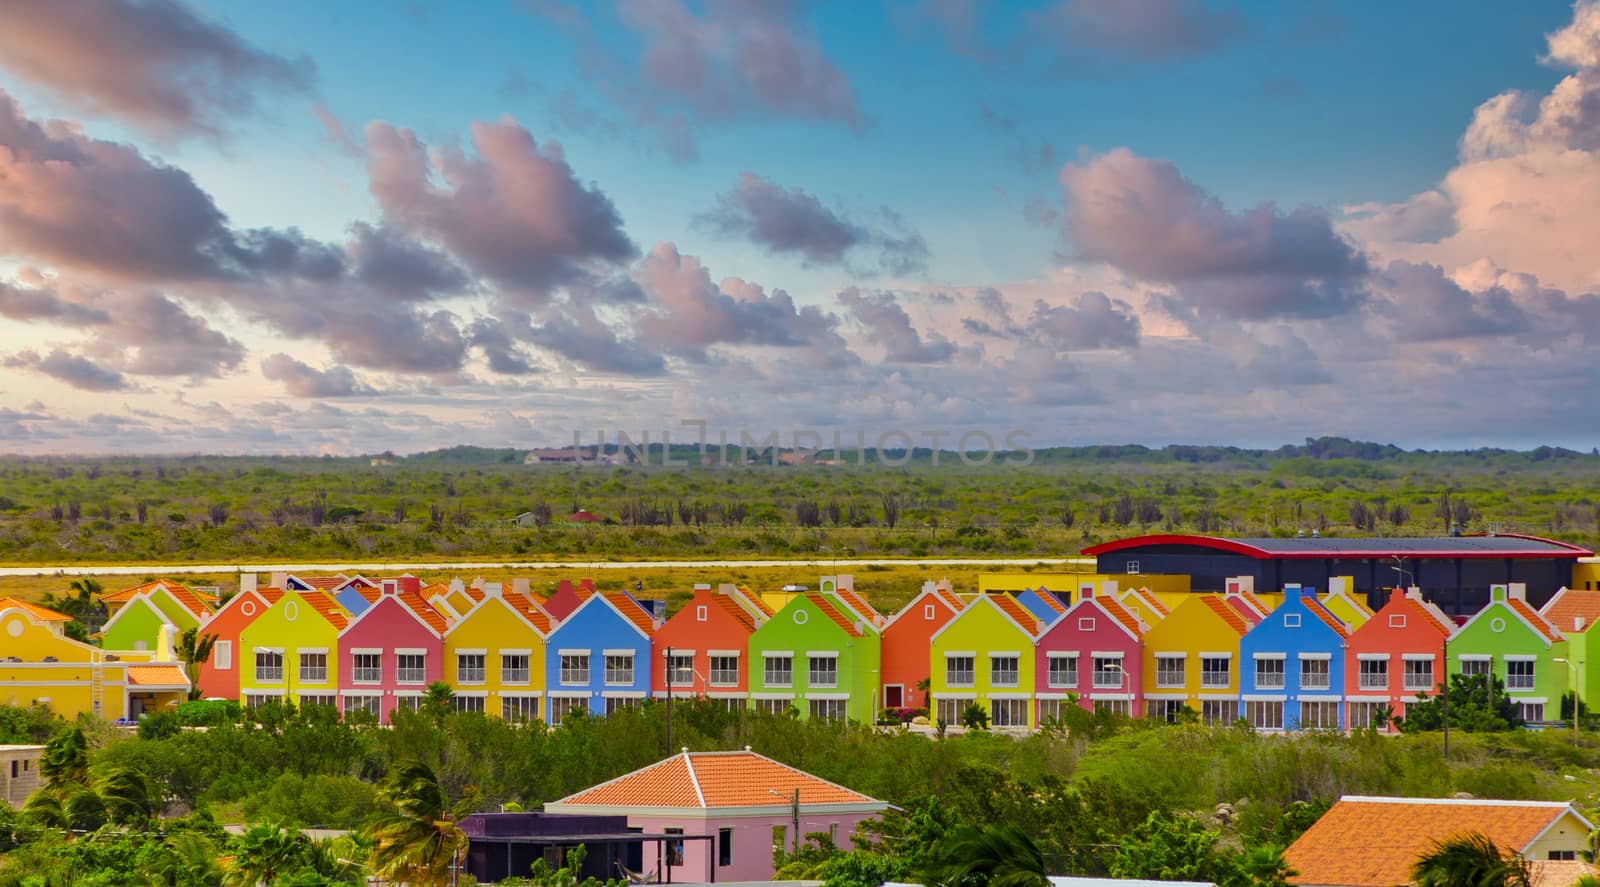 Colorful Cabanas on Plains of Curacao near Airport